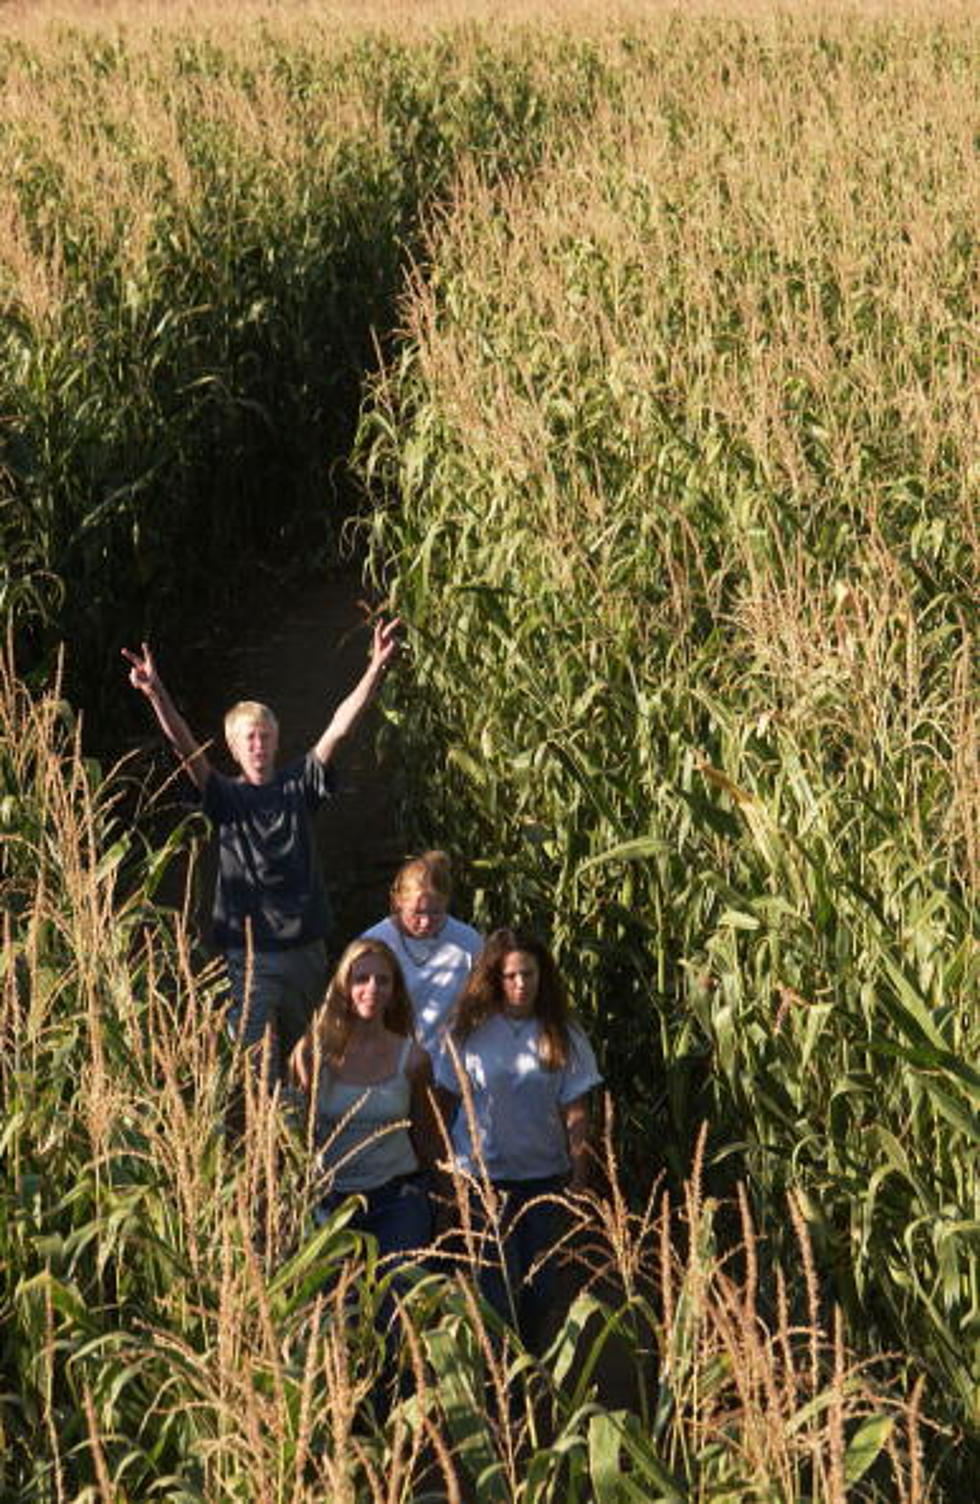 Get Lost Today in a Cornmaze!